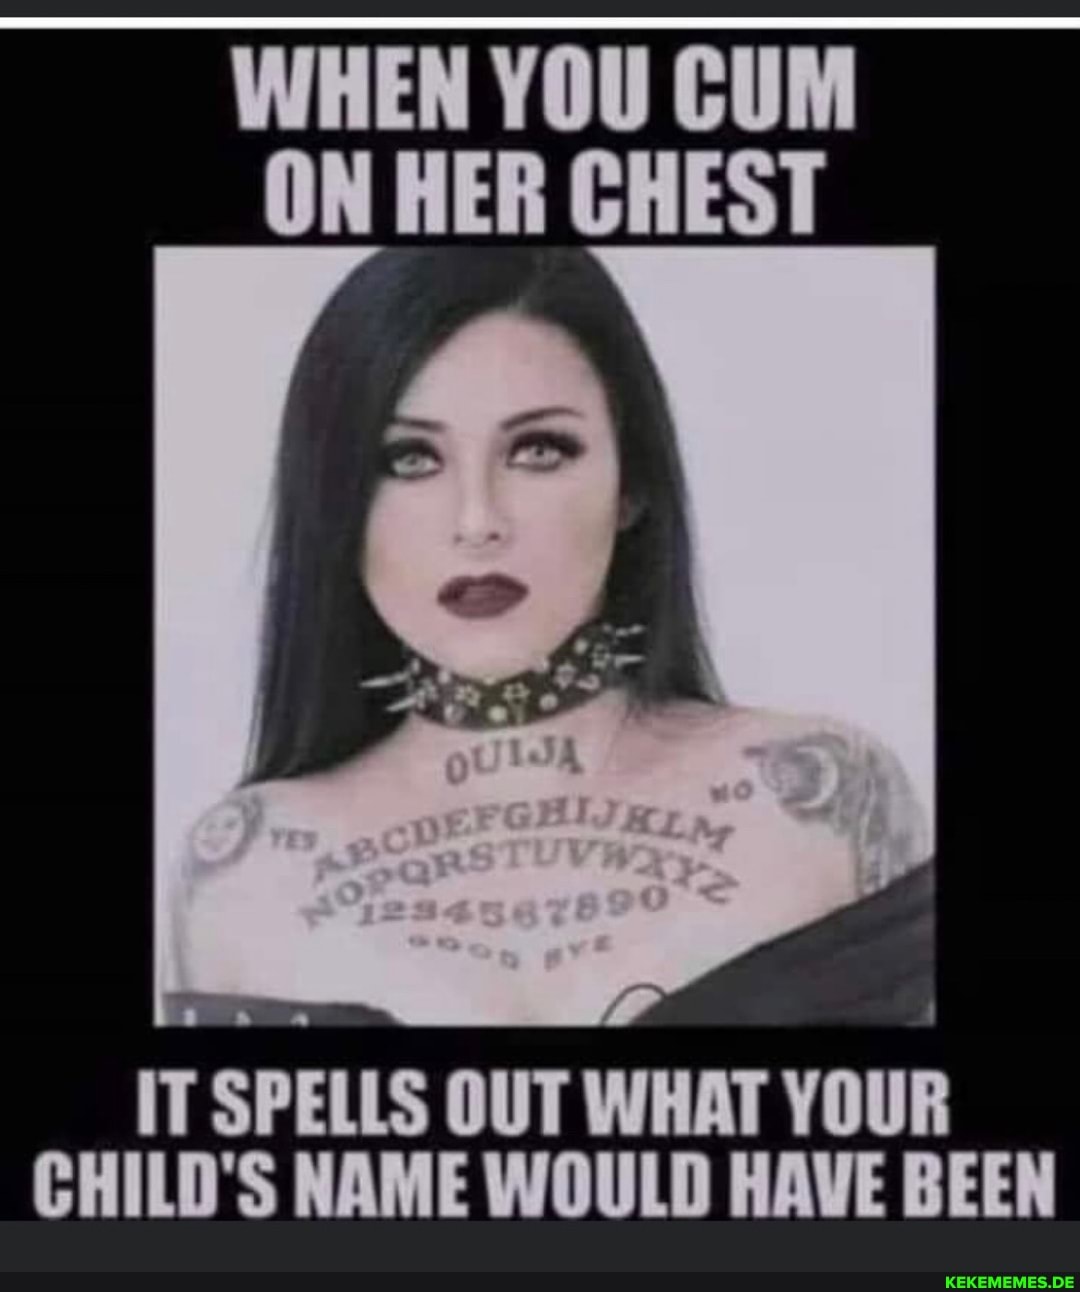 WHEN YOU CUM ON HER CHEST IT SPELLS OUT WHAT YOUR CHILD'S NAME WOULD HAVE BEEN